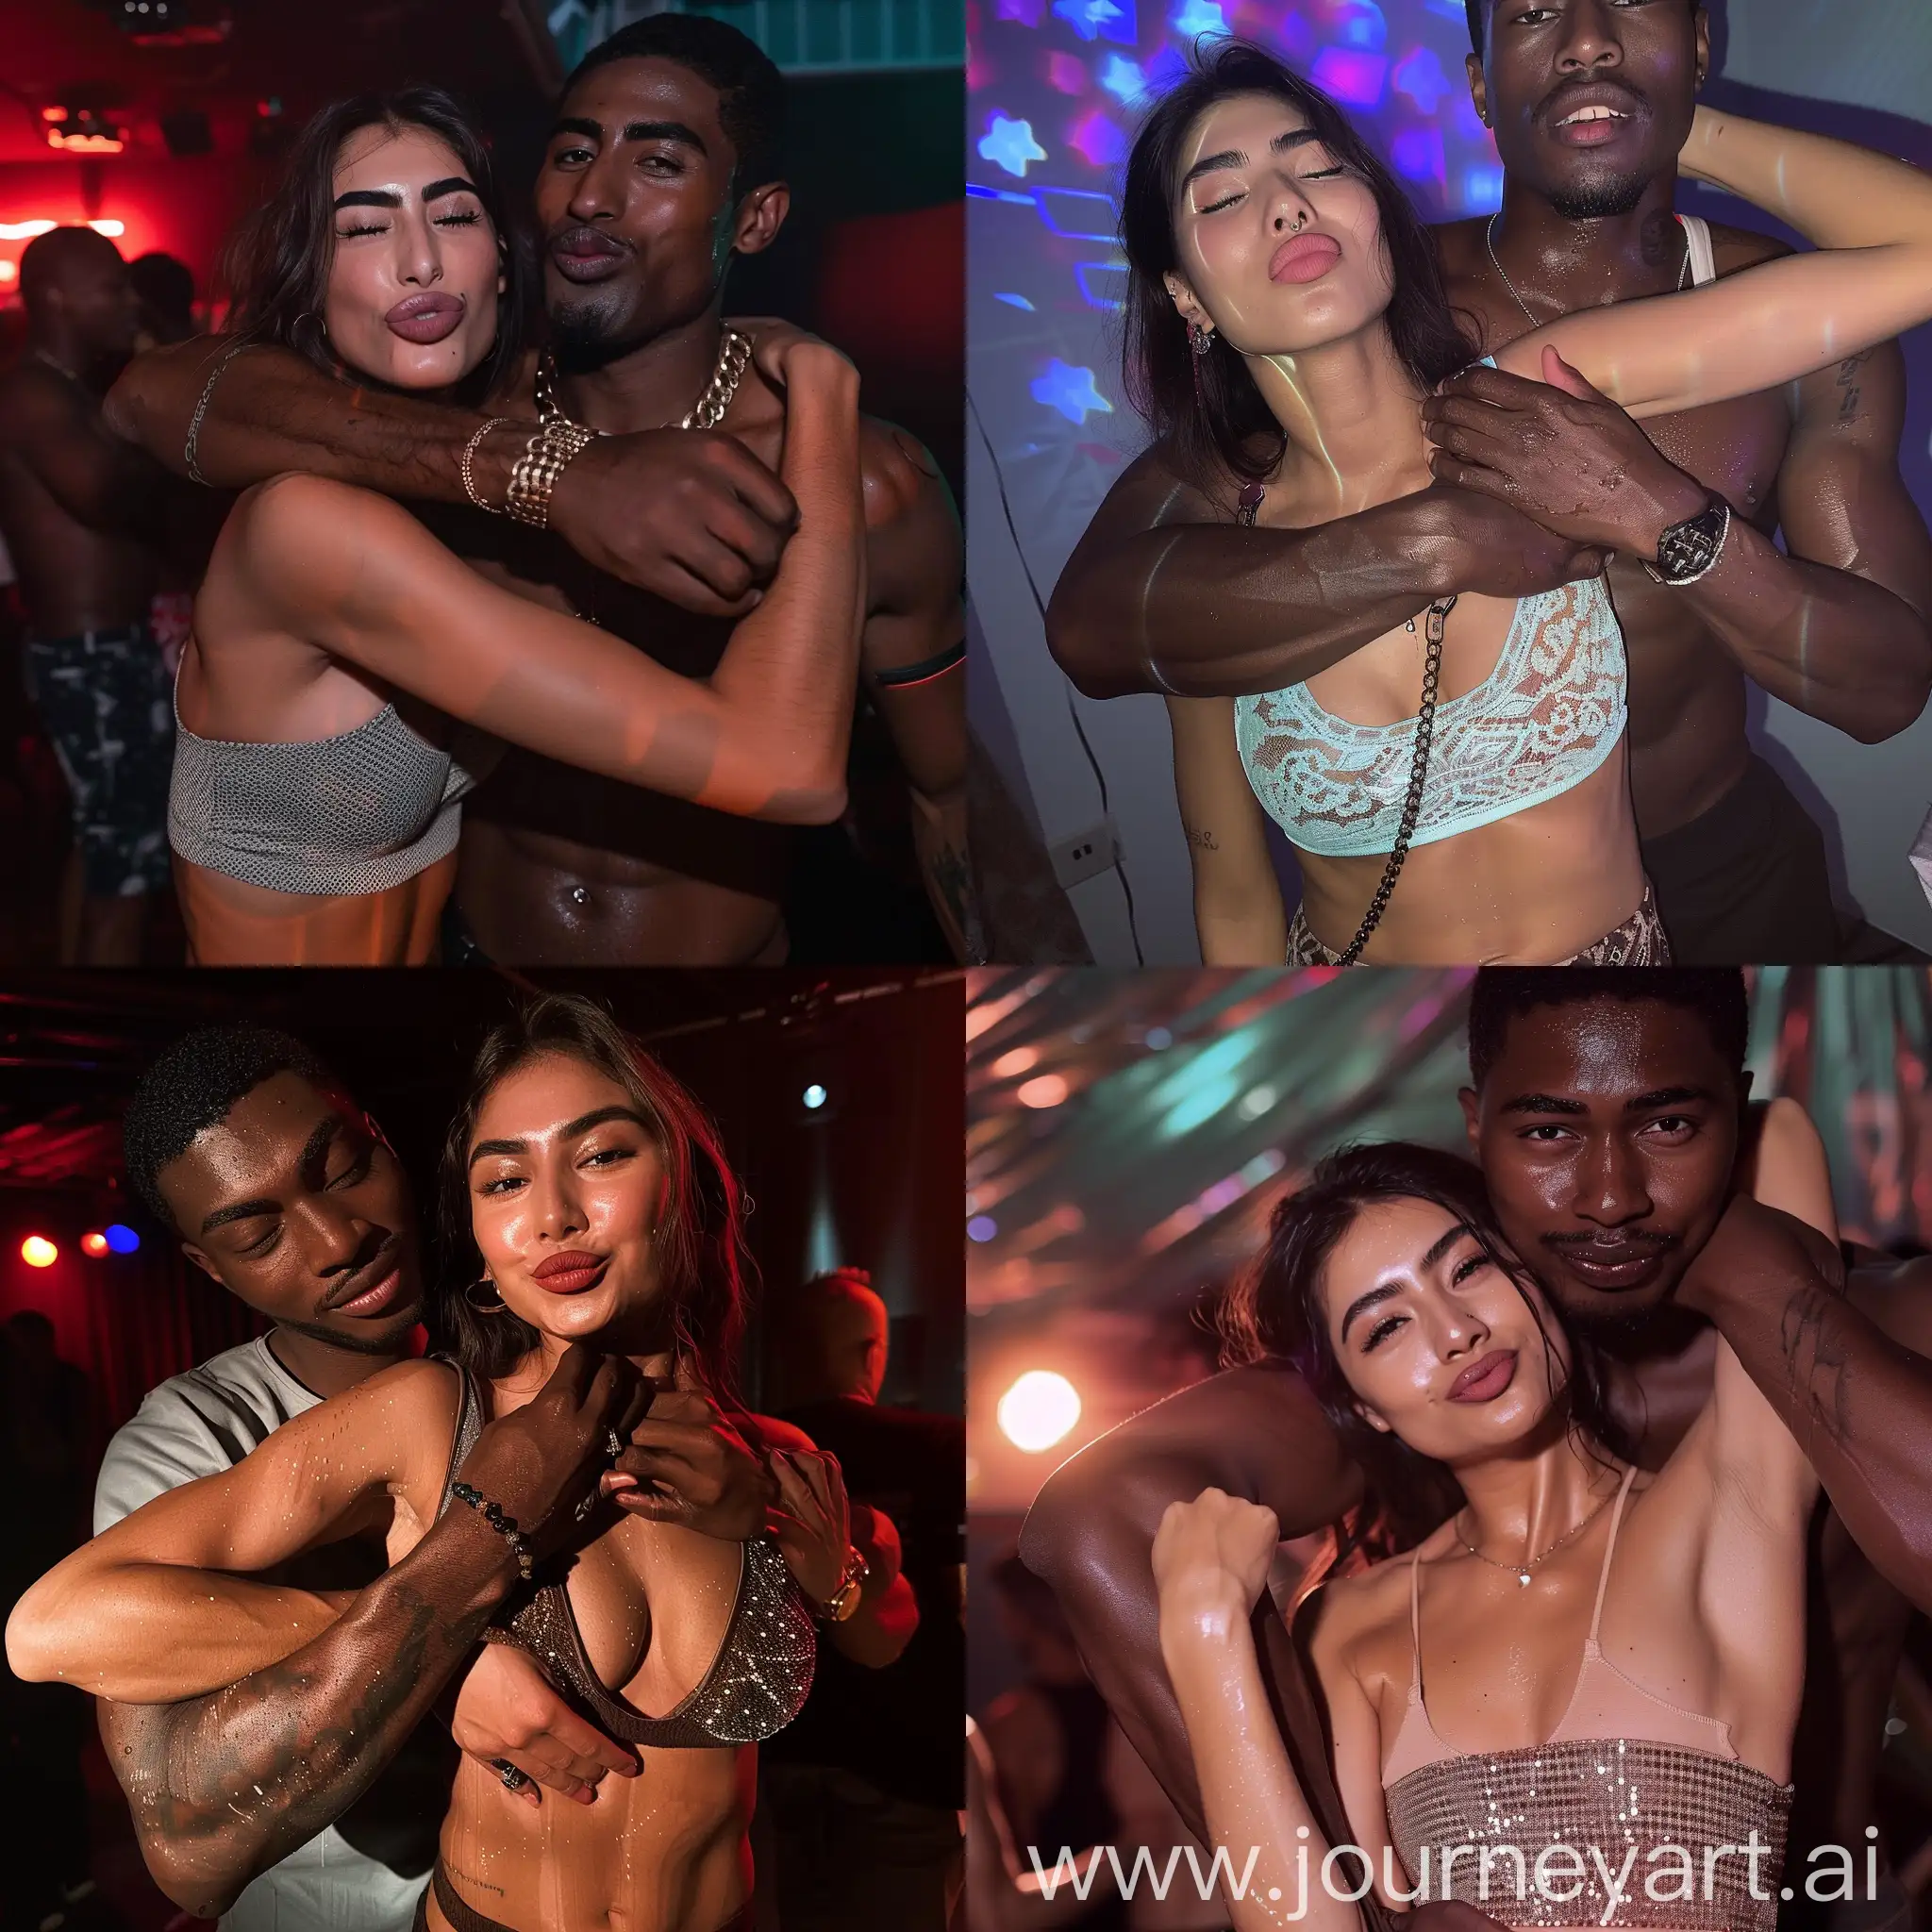 Persian-Woman-and-African-Partner-in-Club-Embrace-Selfie